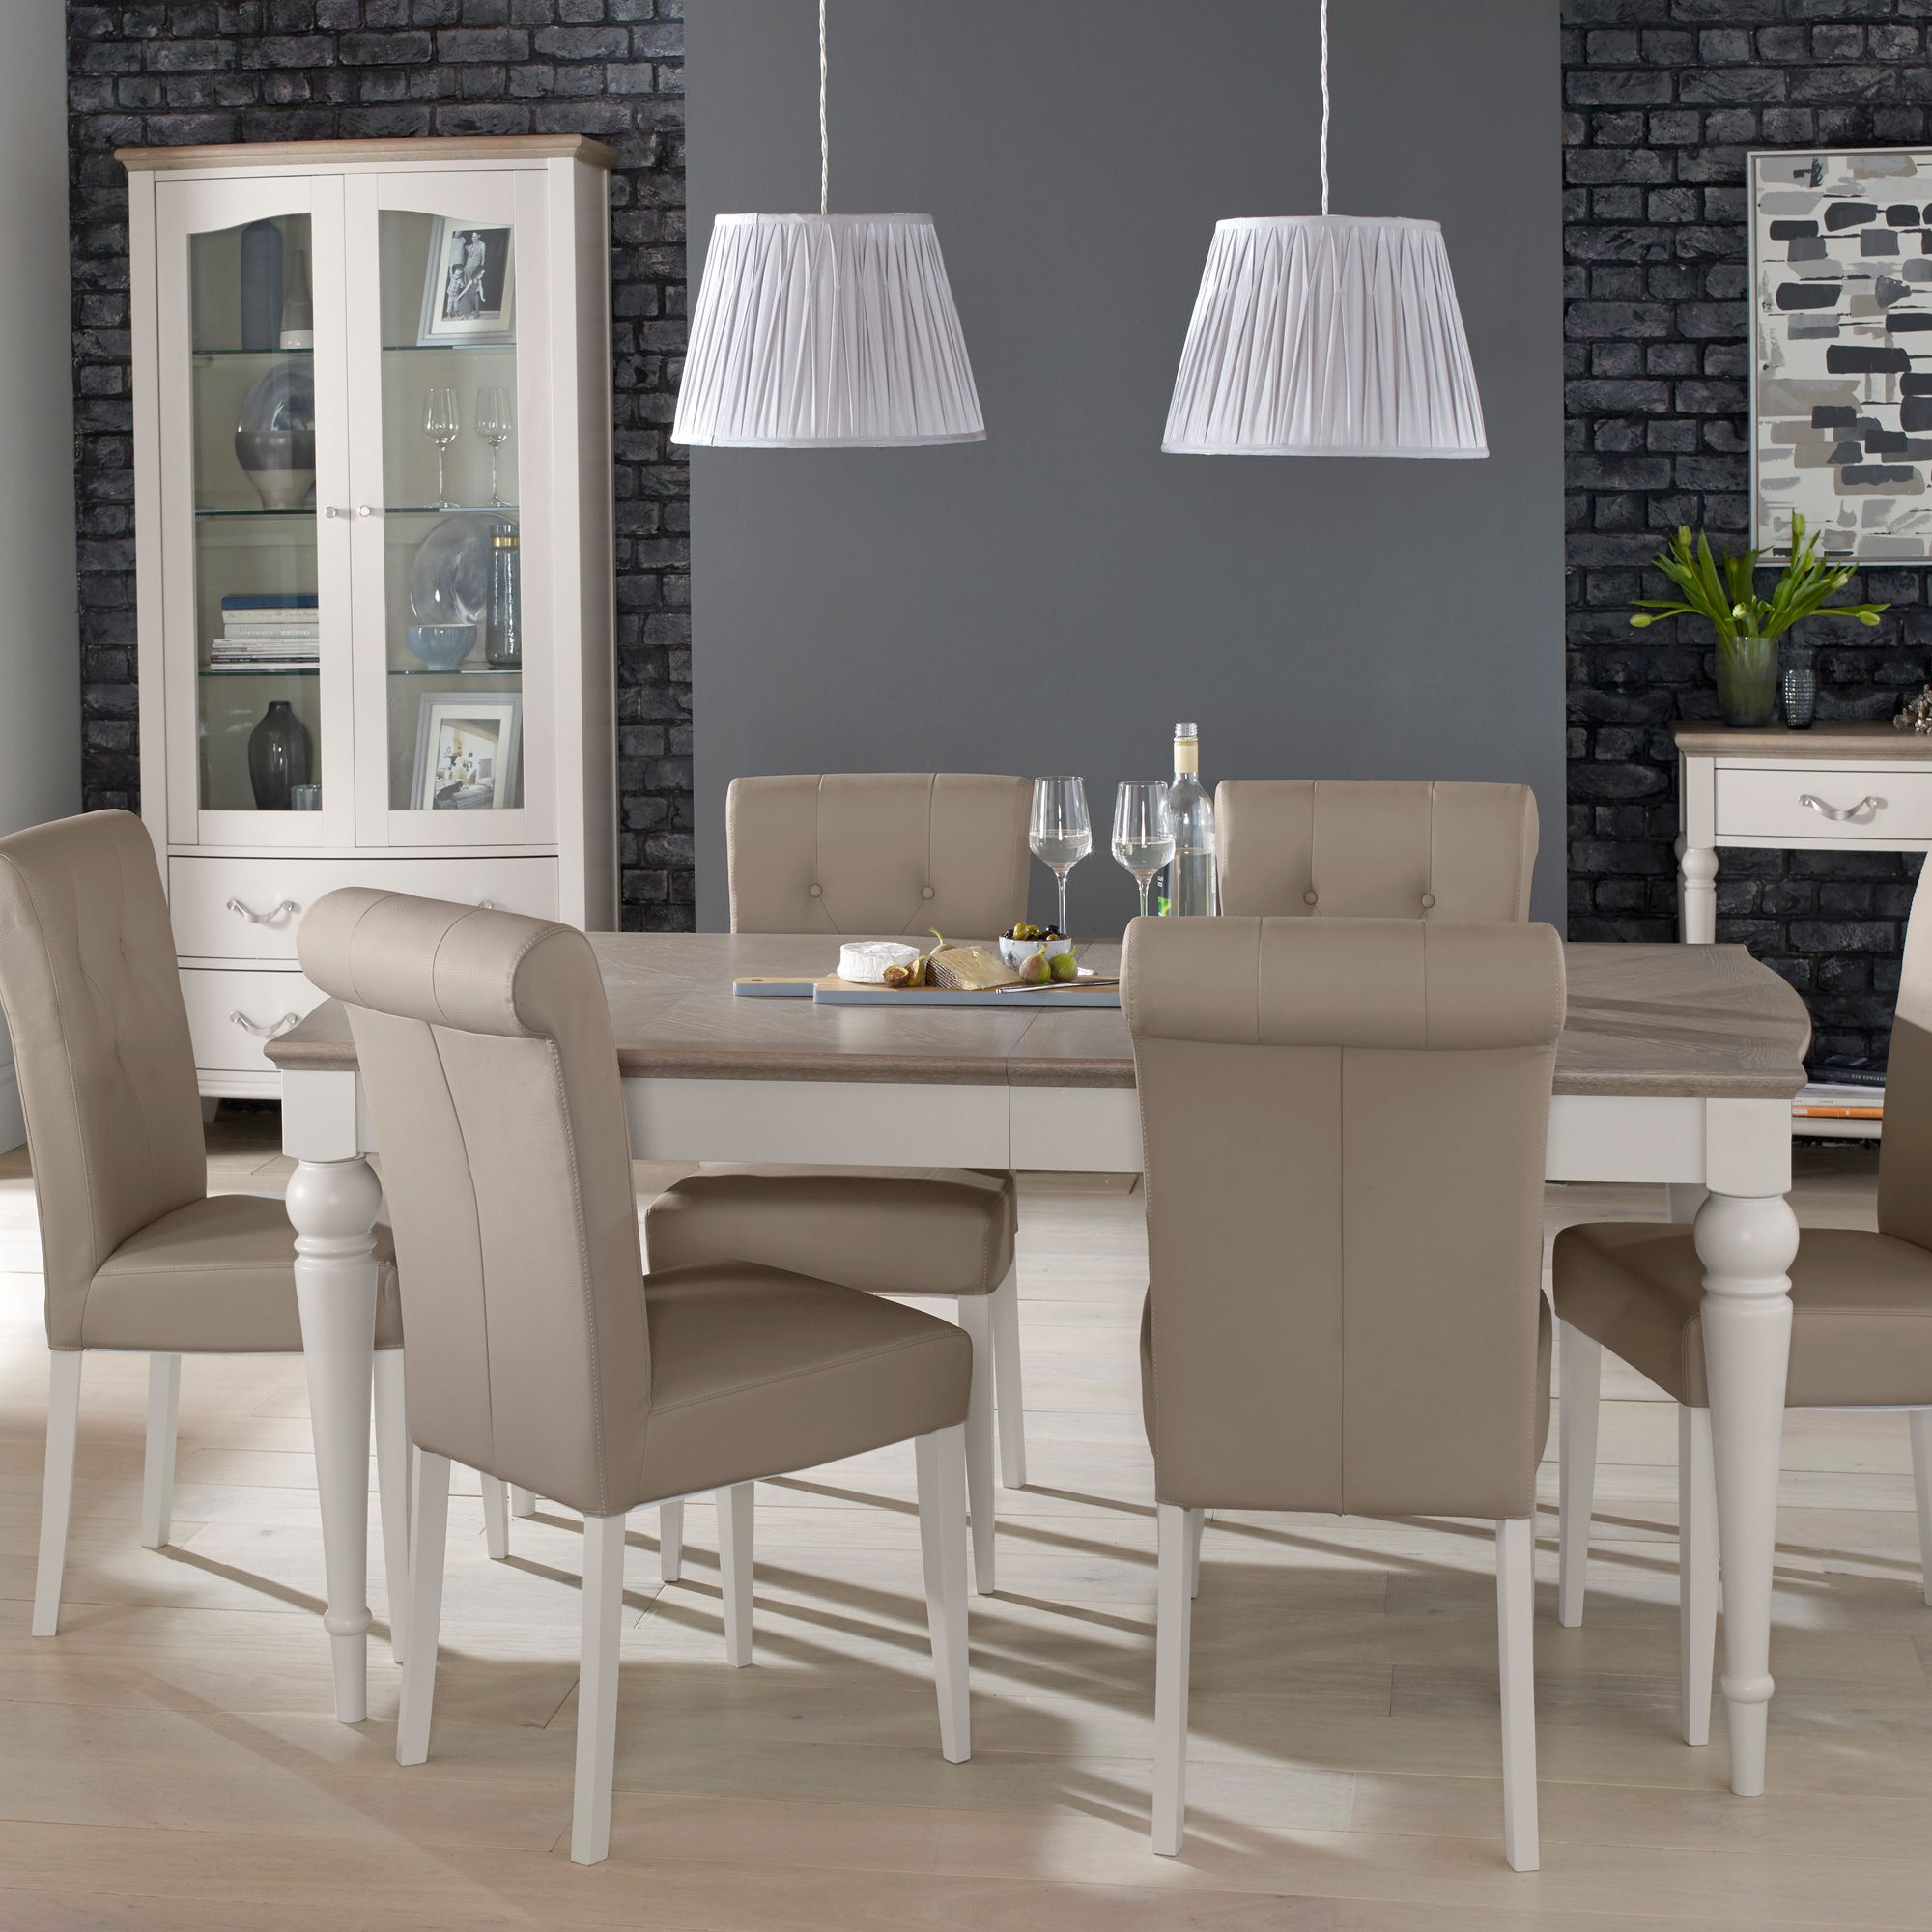 Grey Washed Oak Extending Dining Table, Grey Dining Room Table With Leather Chairs